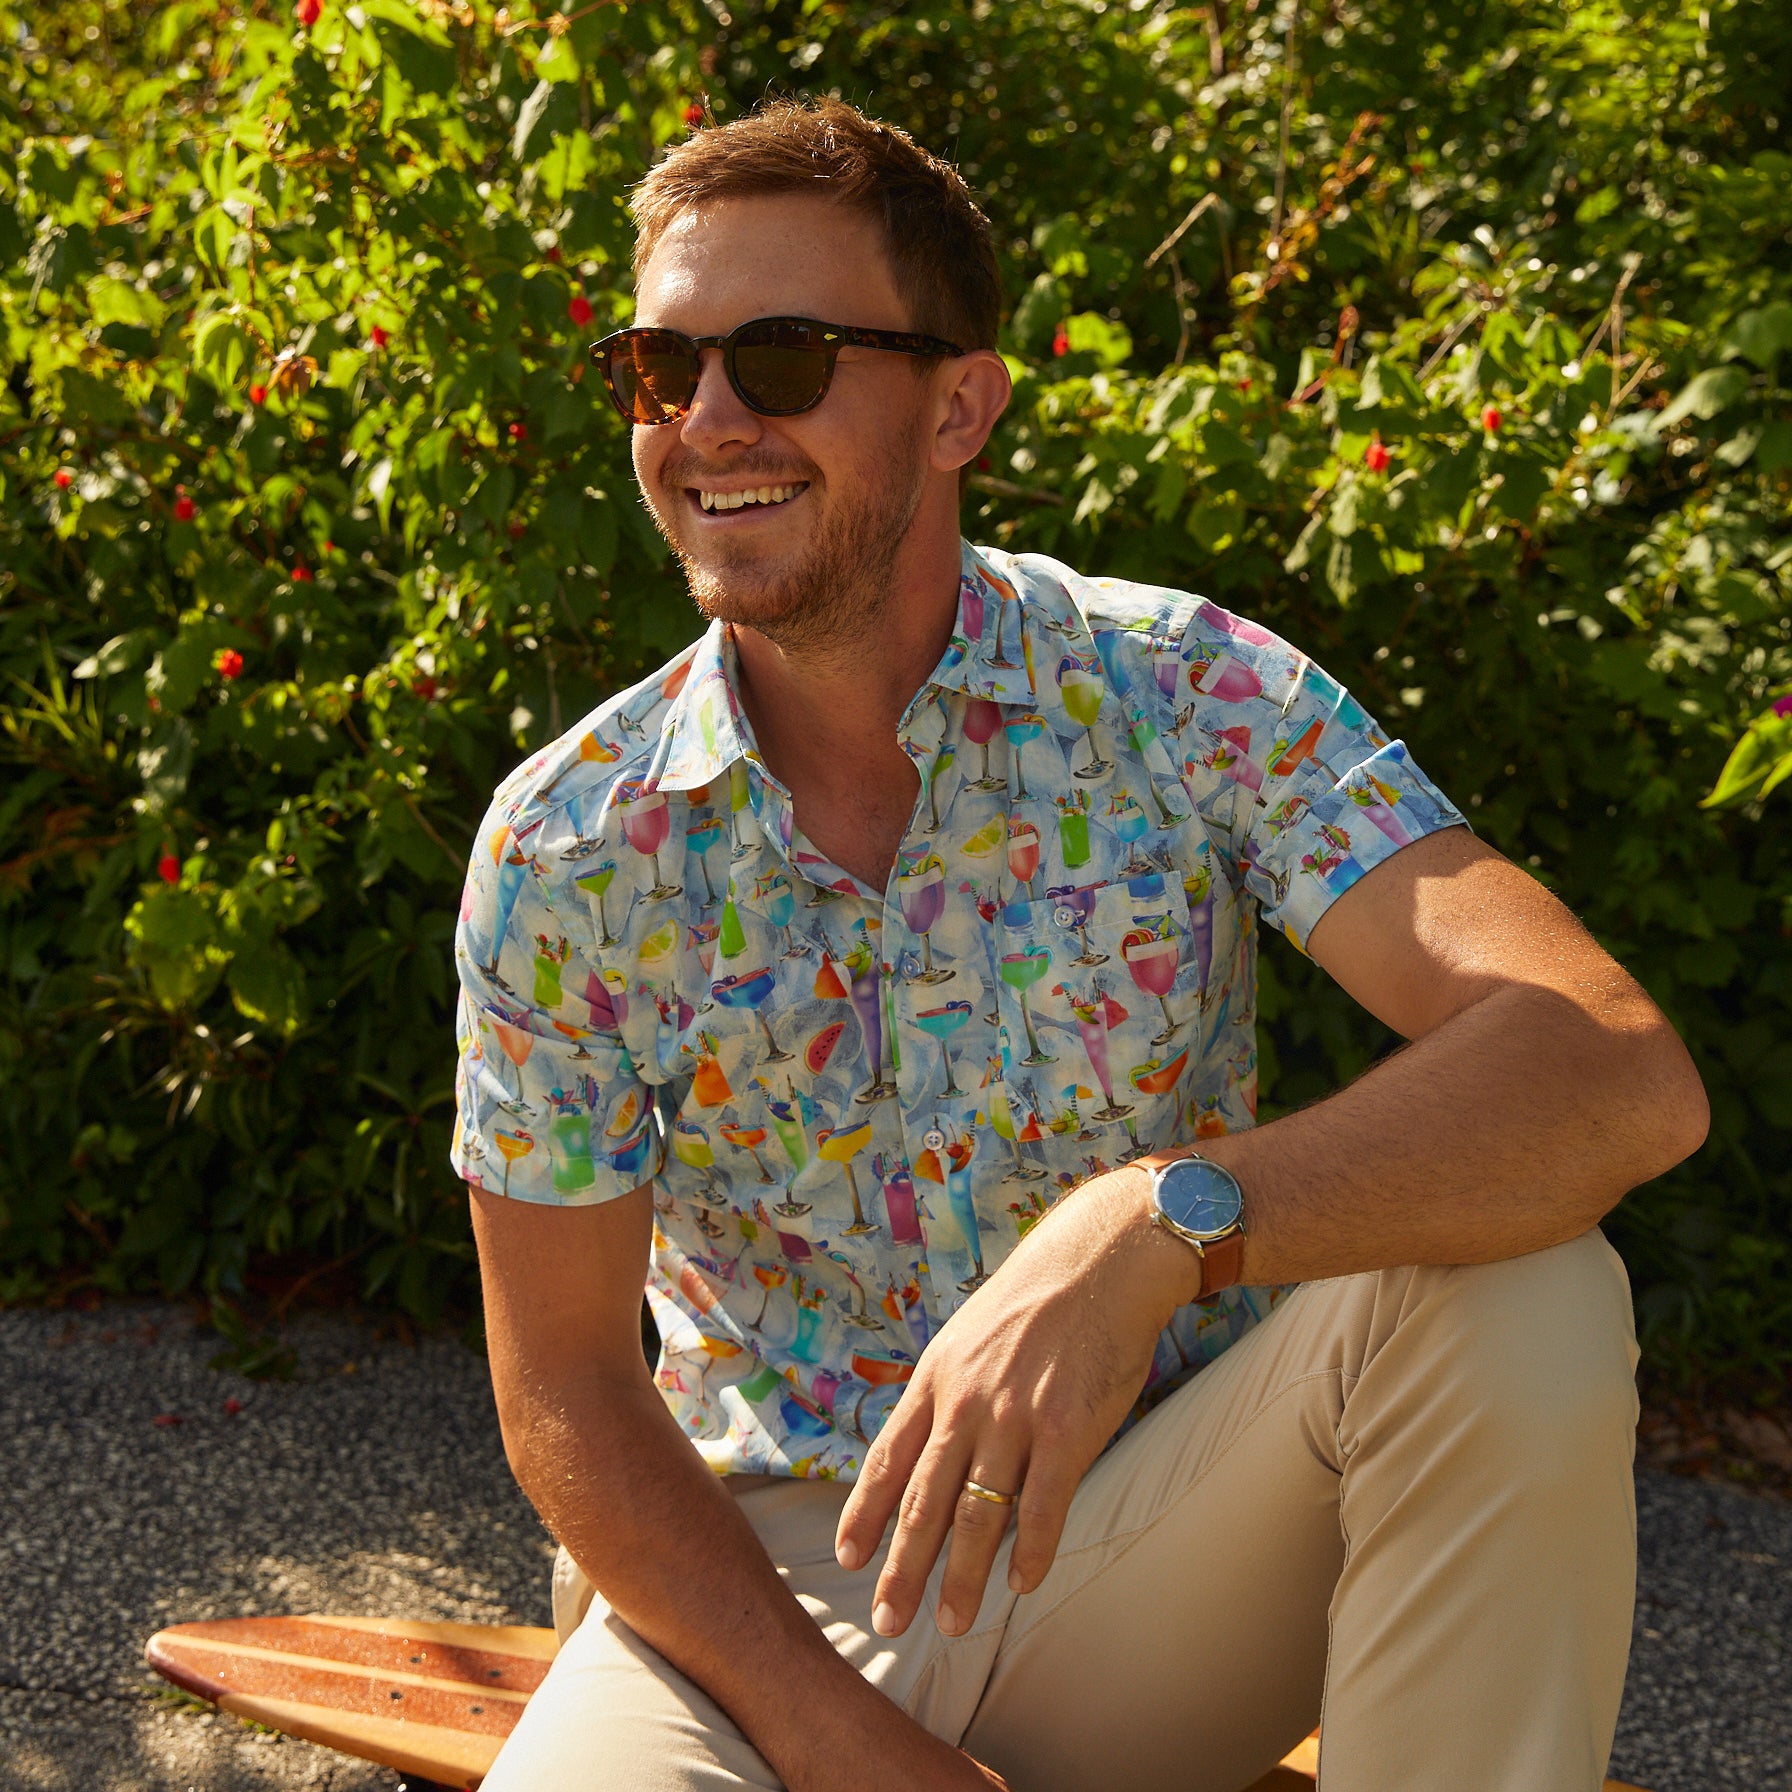 Wherever you're going for. your good times, this shirt is already there! Beach ready, happy hour ready, this one's ready to go.  100% Cotton  •  Short Sleeve Camp Shirt  •  Soft Collar  •  French Plackett  •  Square Bottom  •  Chest Pocket  •  Machine Wash  •  Made in Italy 